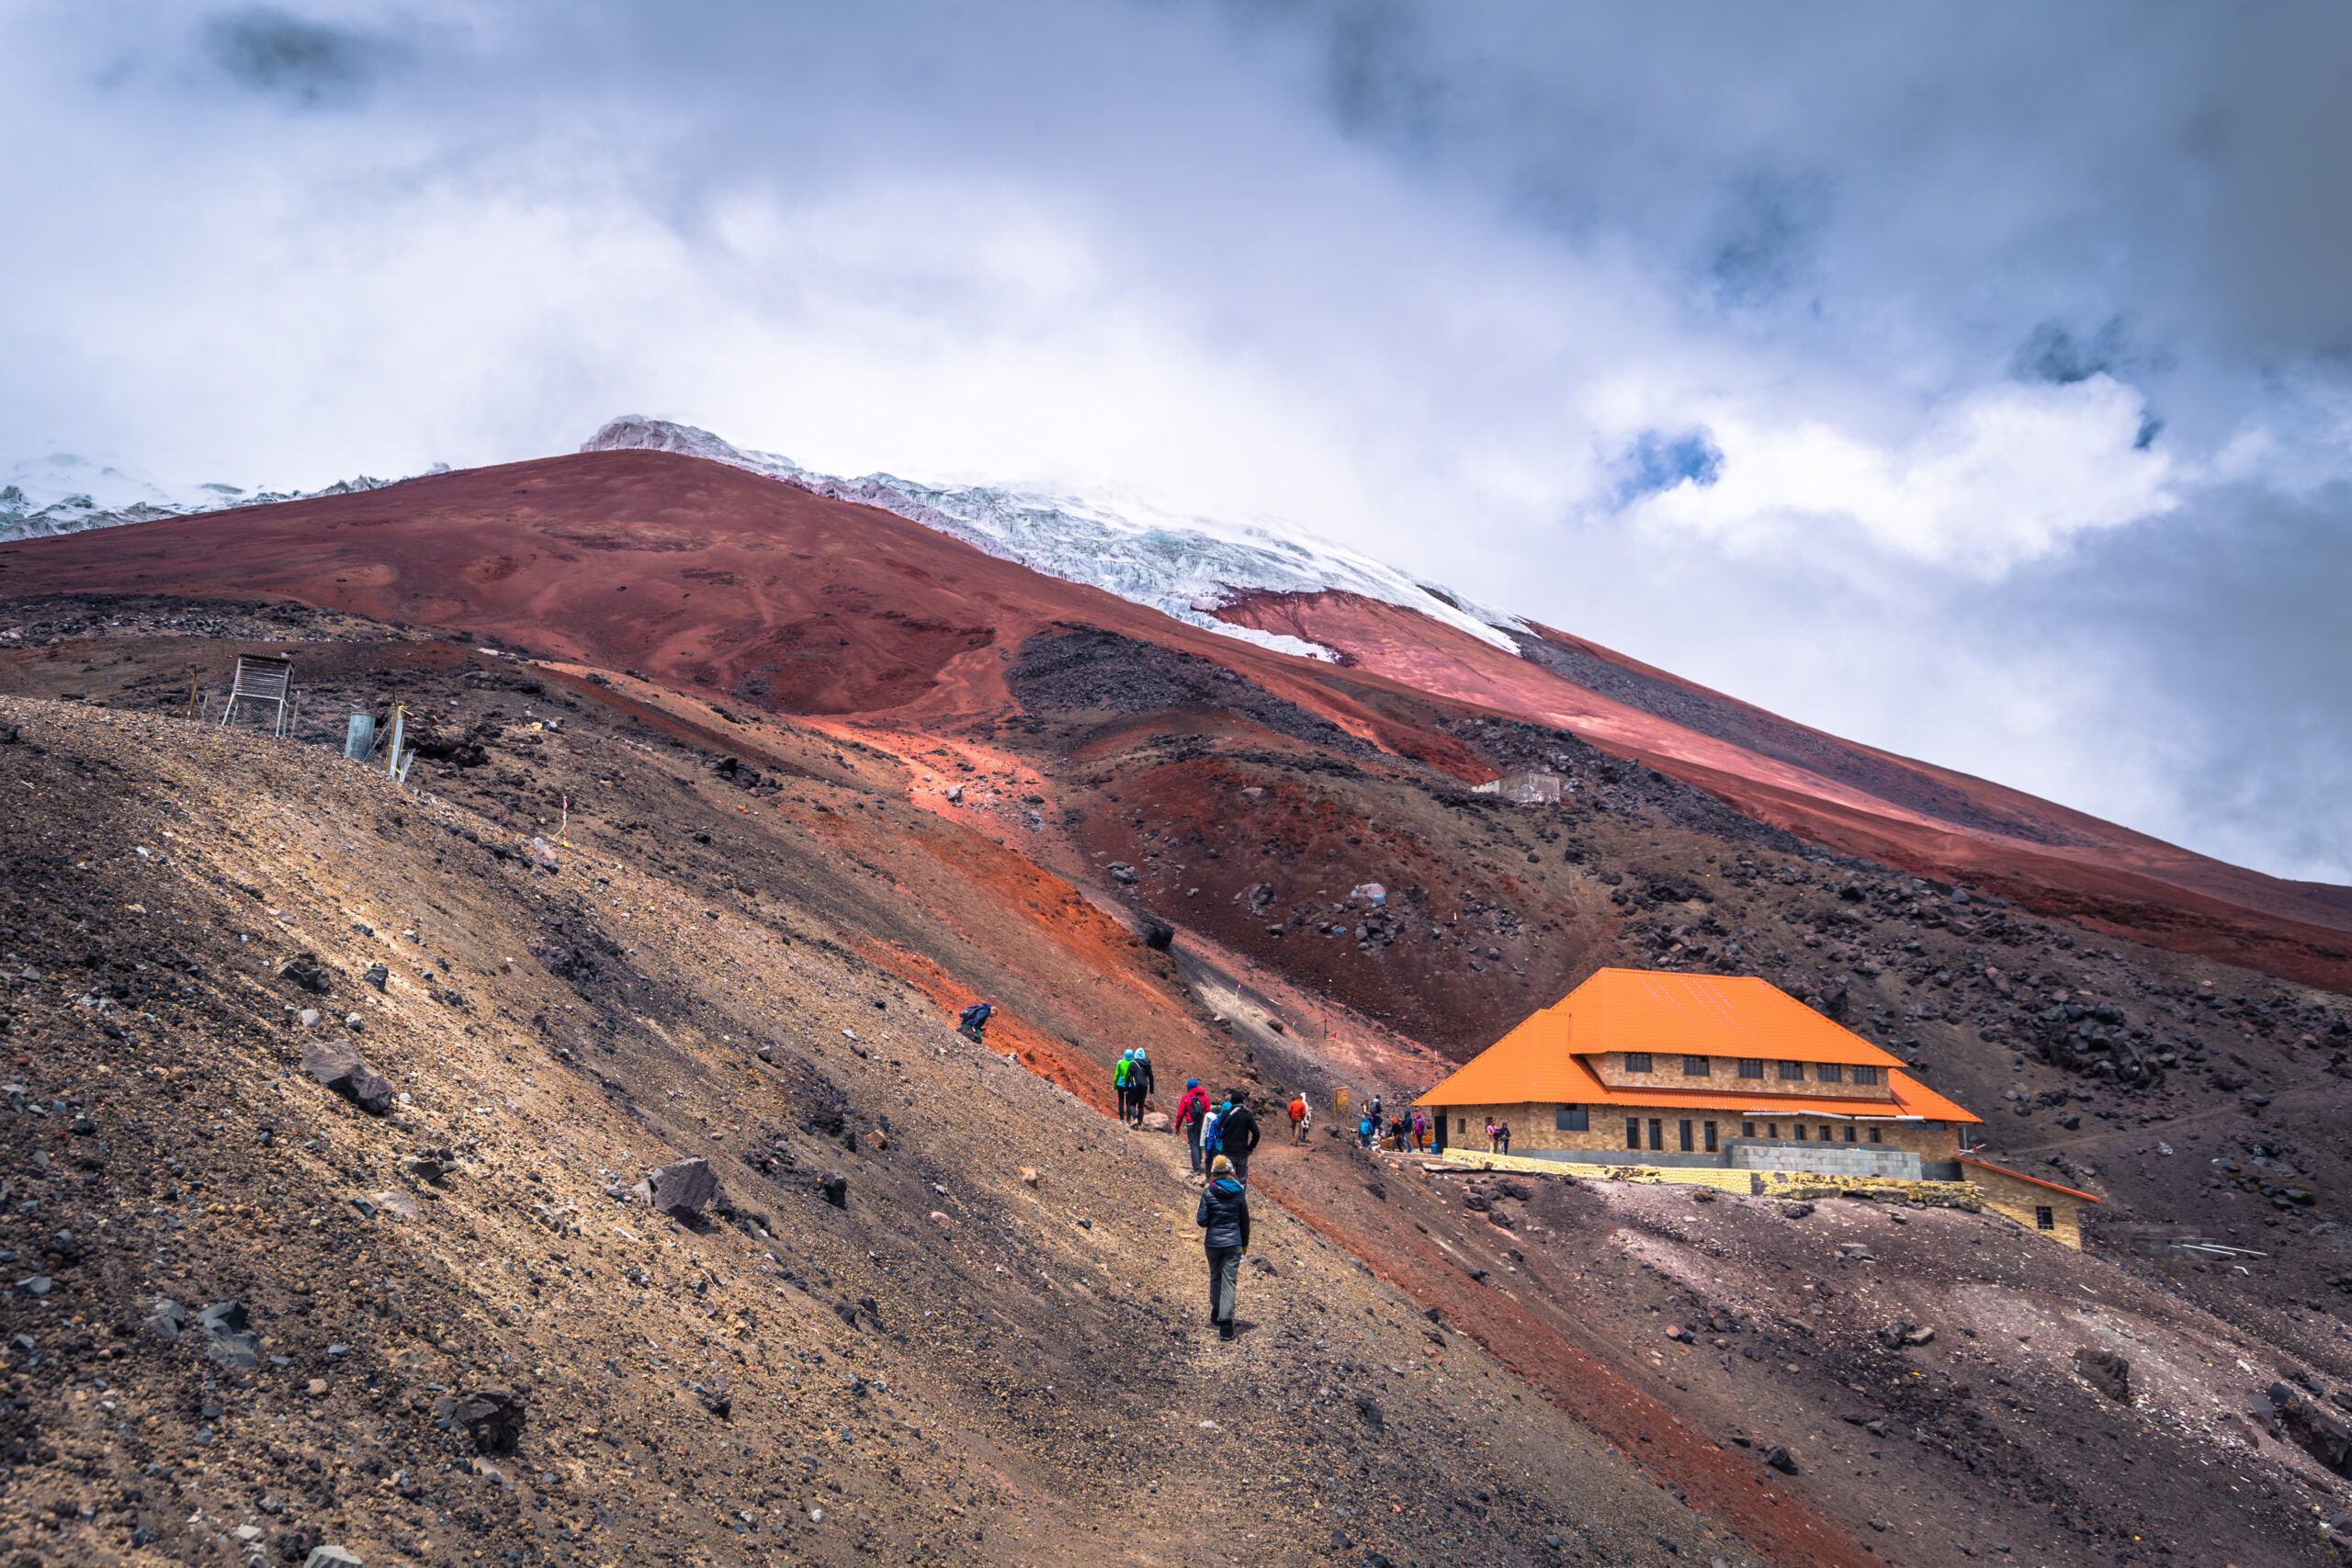 Cotopaxi - August 18, 2018: Refuge at 5000 meters of altitude in Cotopaxi National Park, Ecuador